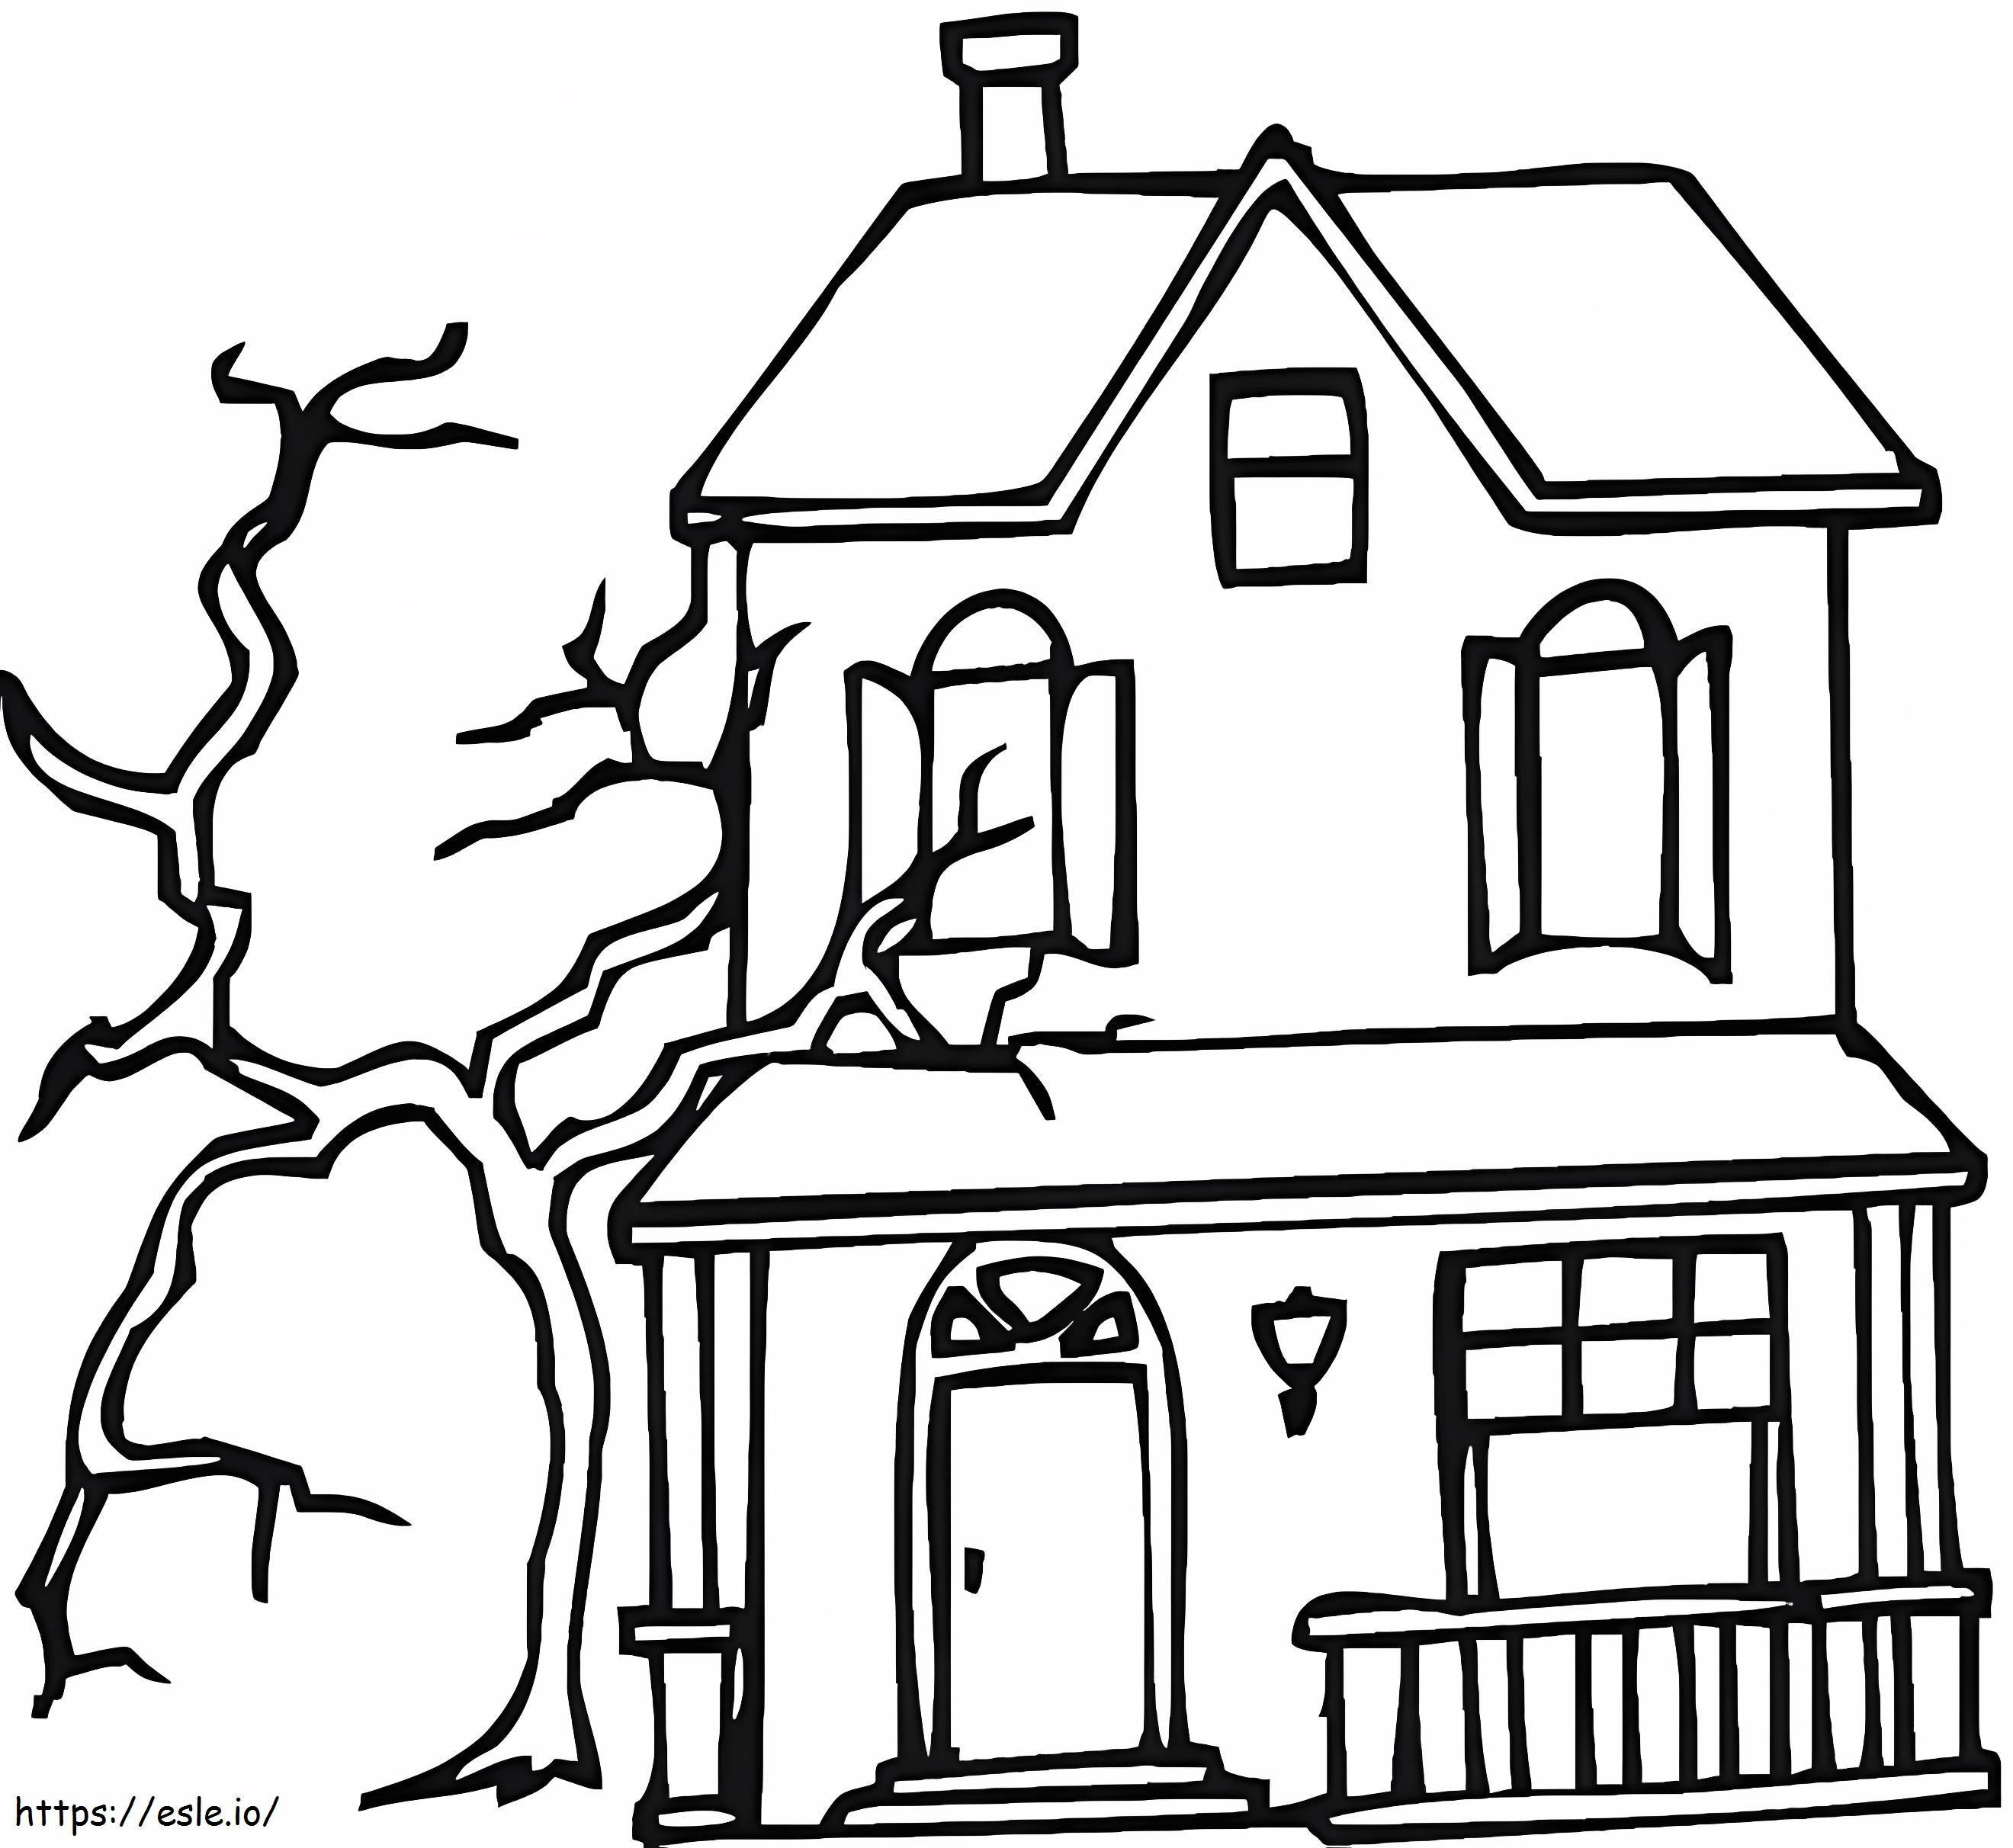 Printable Haunted House coloring page